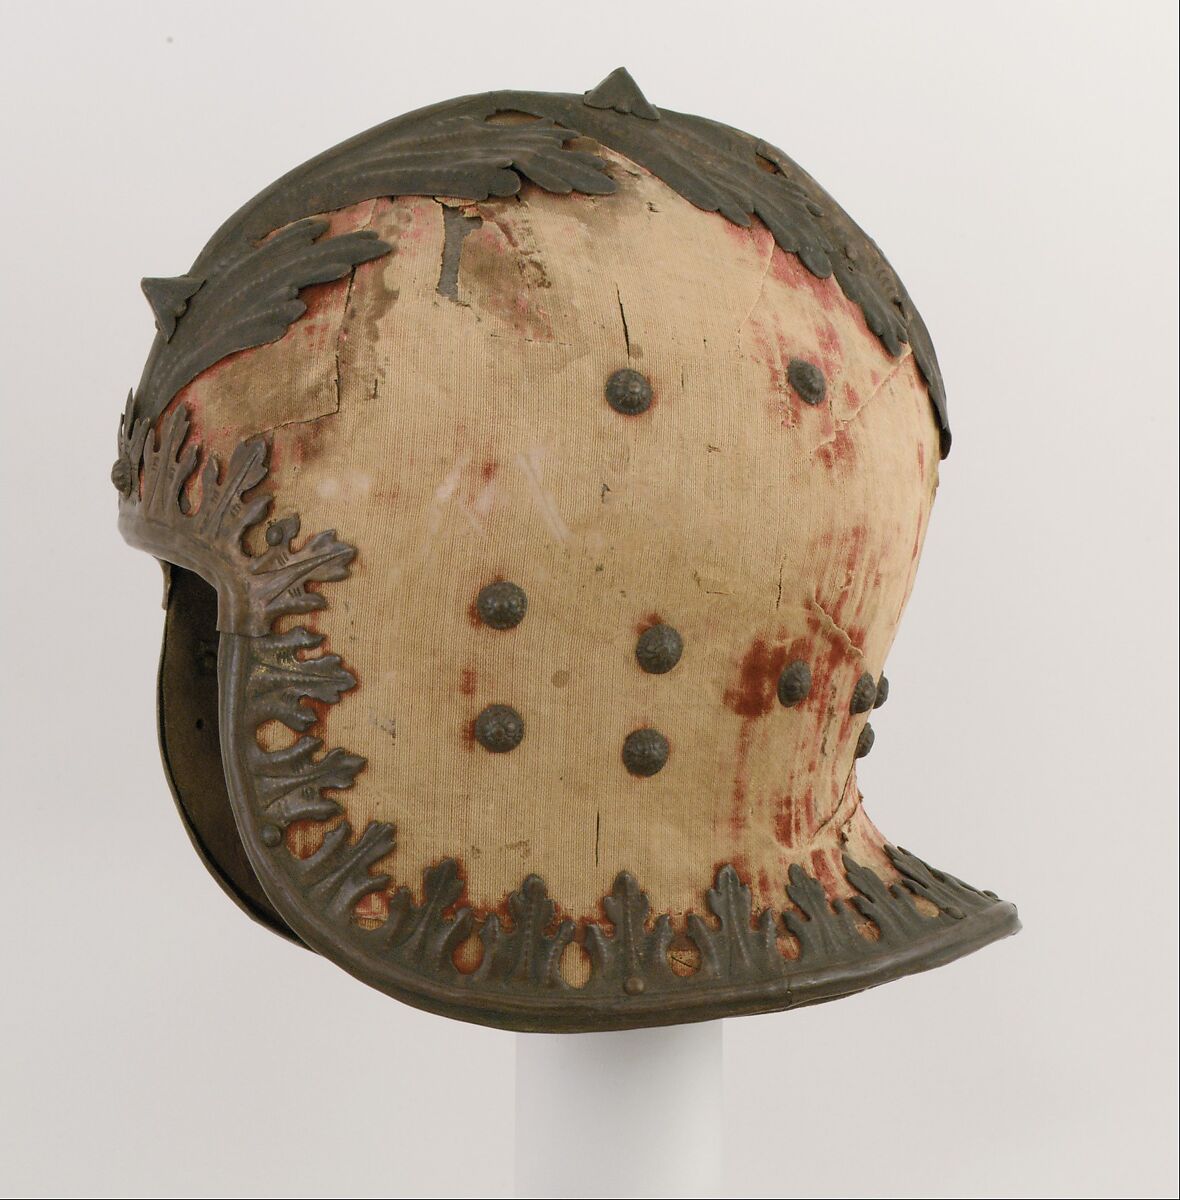 Sallet "in the Venetian Style", Steel, gold, copper, textile, leather, Italian